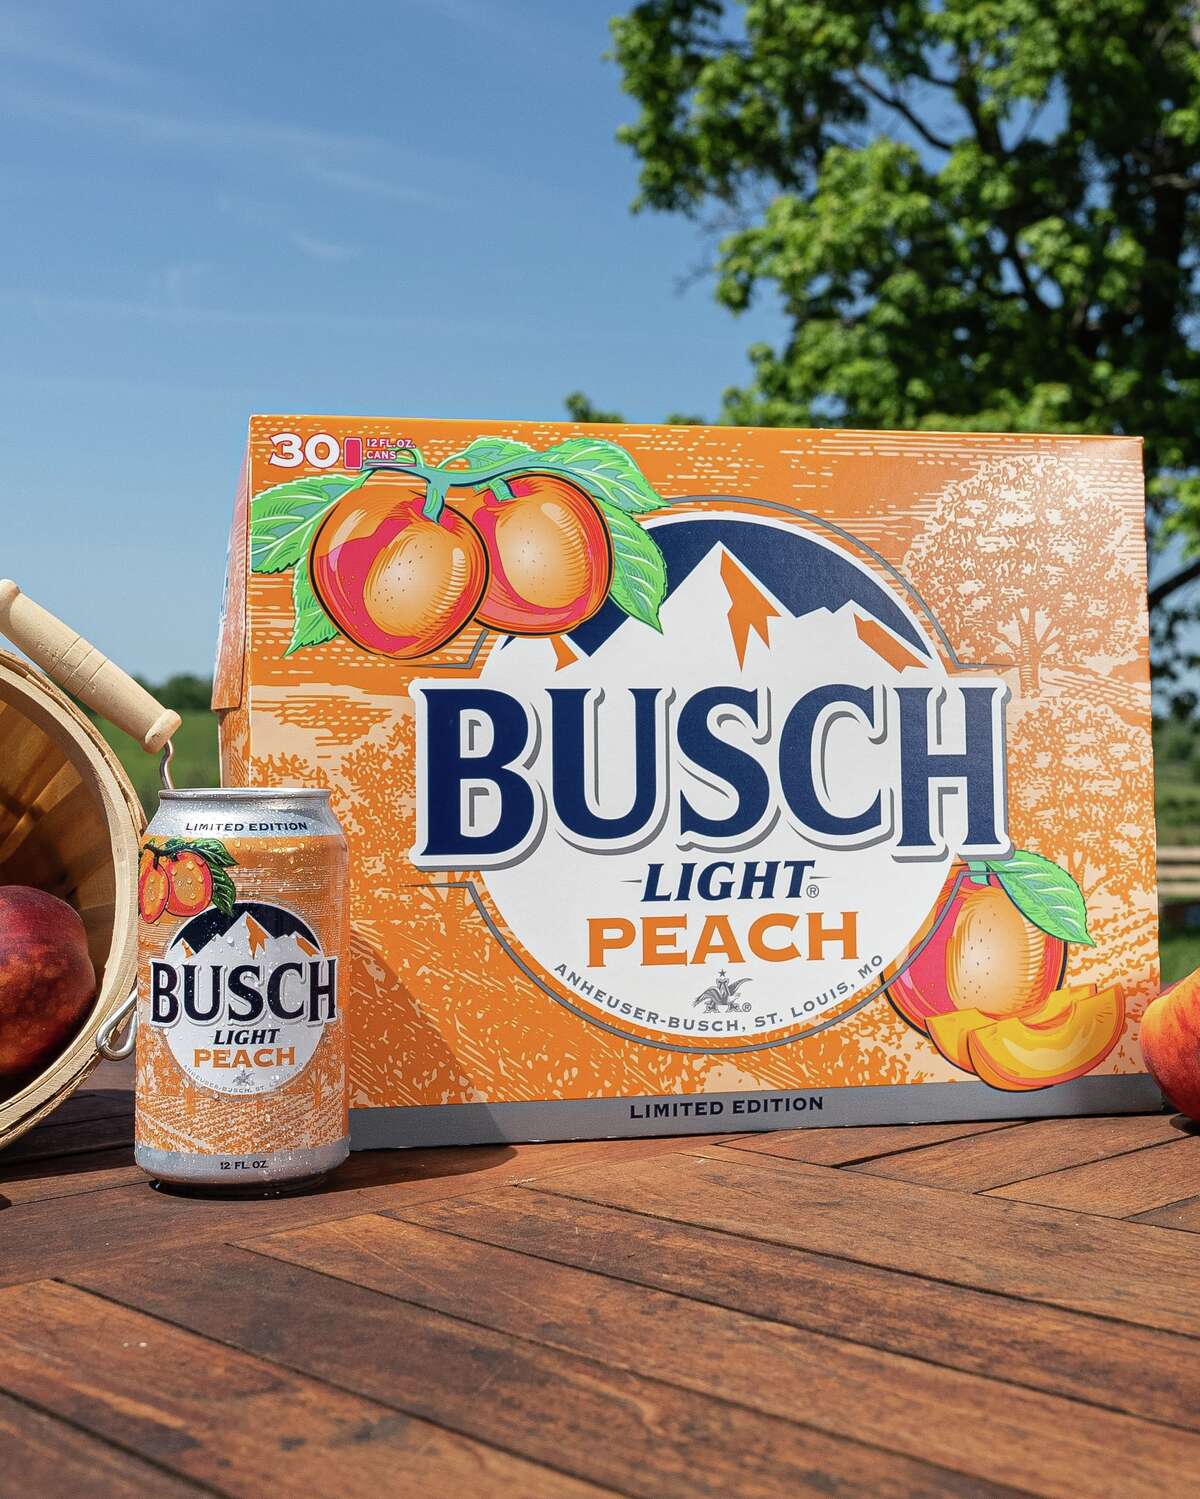 Busch Light Peach is not terrible! You might even like it.